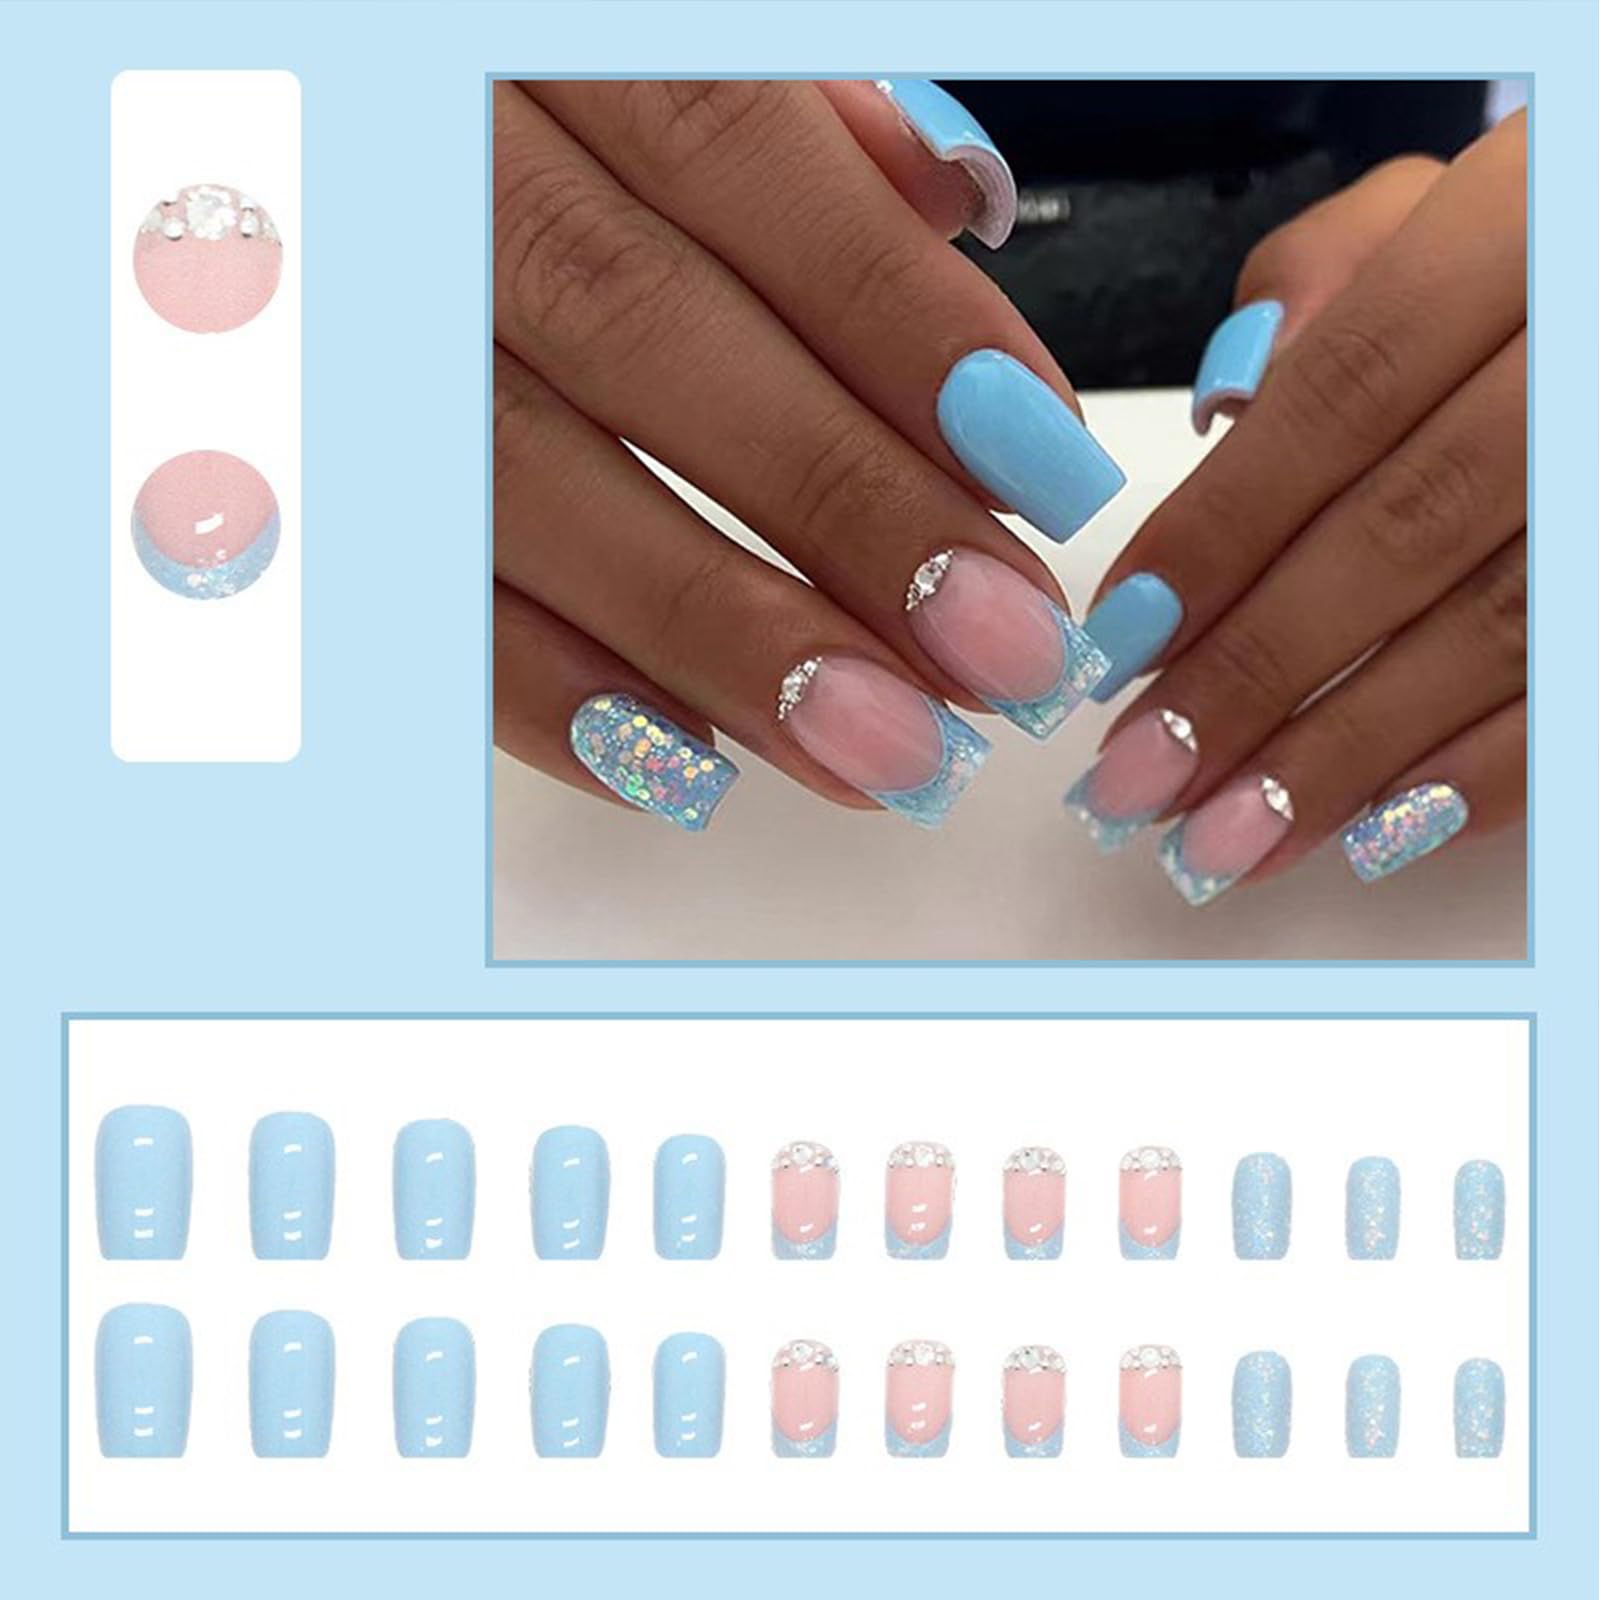 24pcs Short Square False French Tip False Nails Stick on Nails Glitter Press on Nails Removable Glue - on Fake Nails Acrylic Full Cover Nails Women Girls Nail Art Accessories (French White Edge)